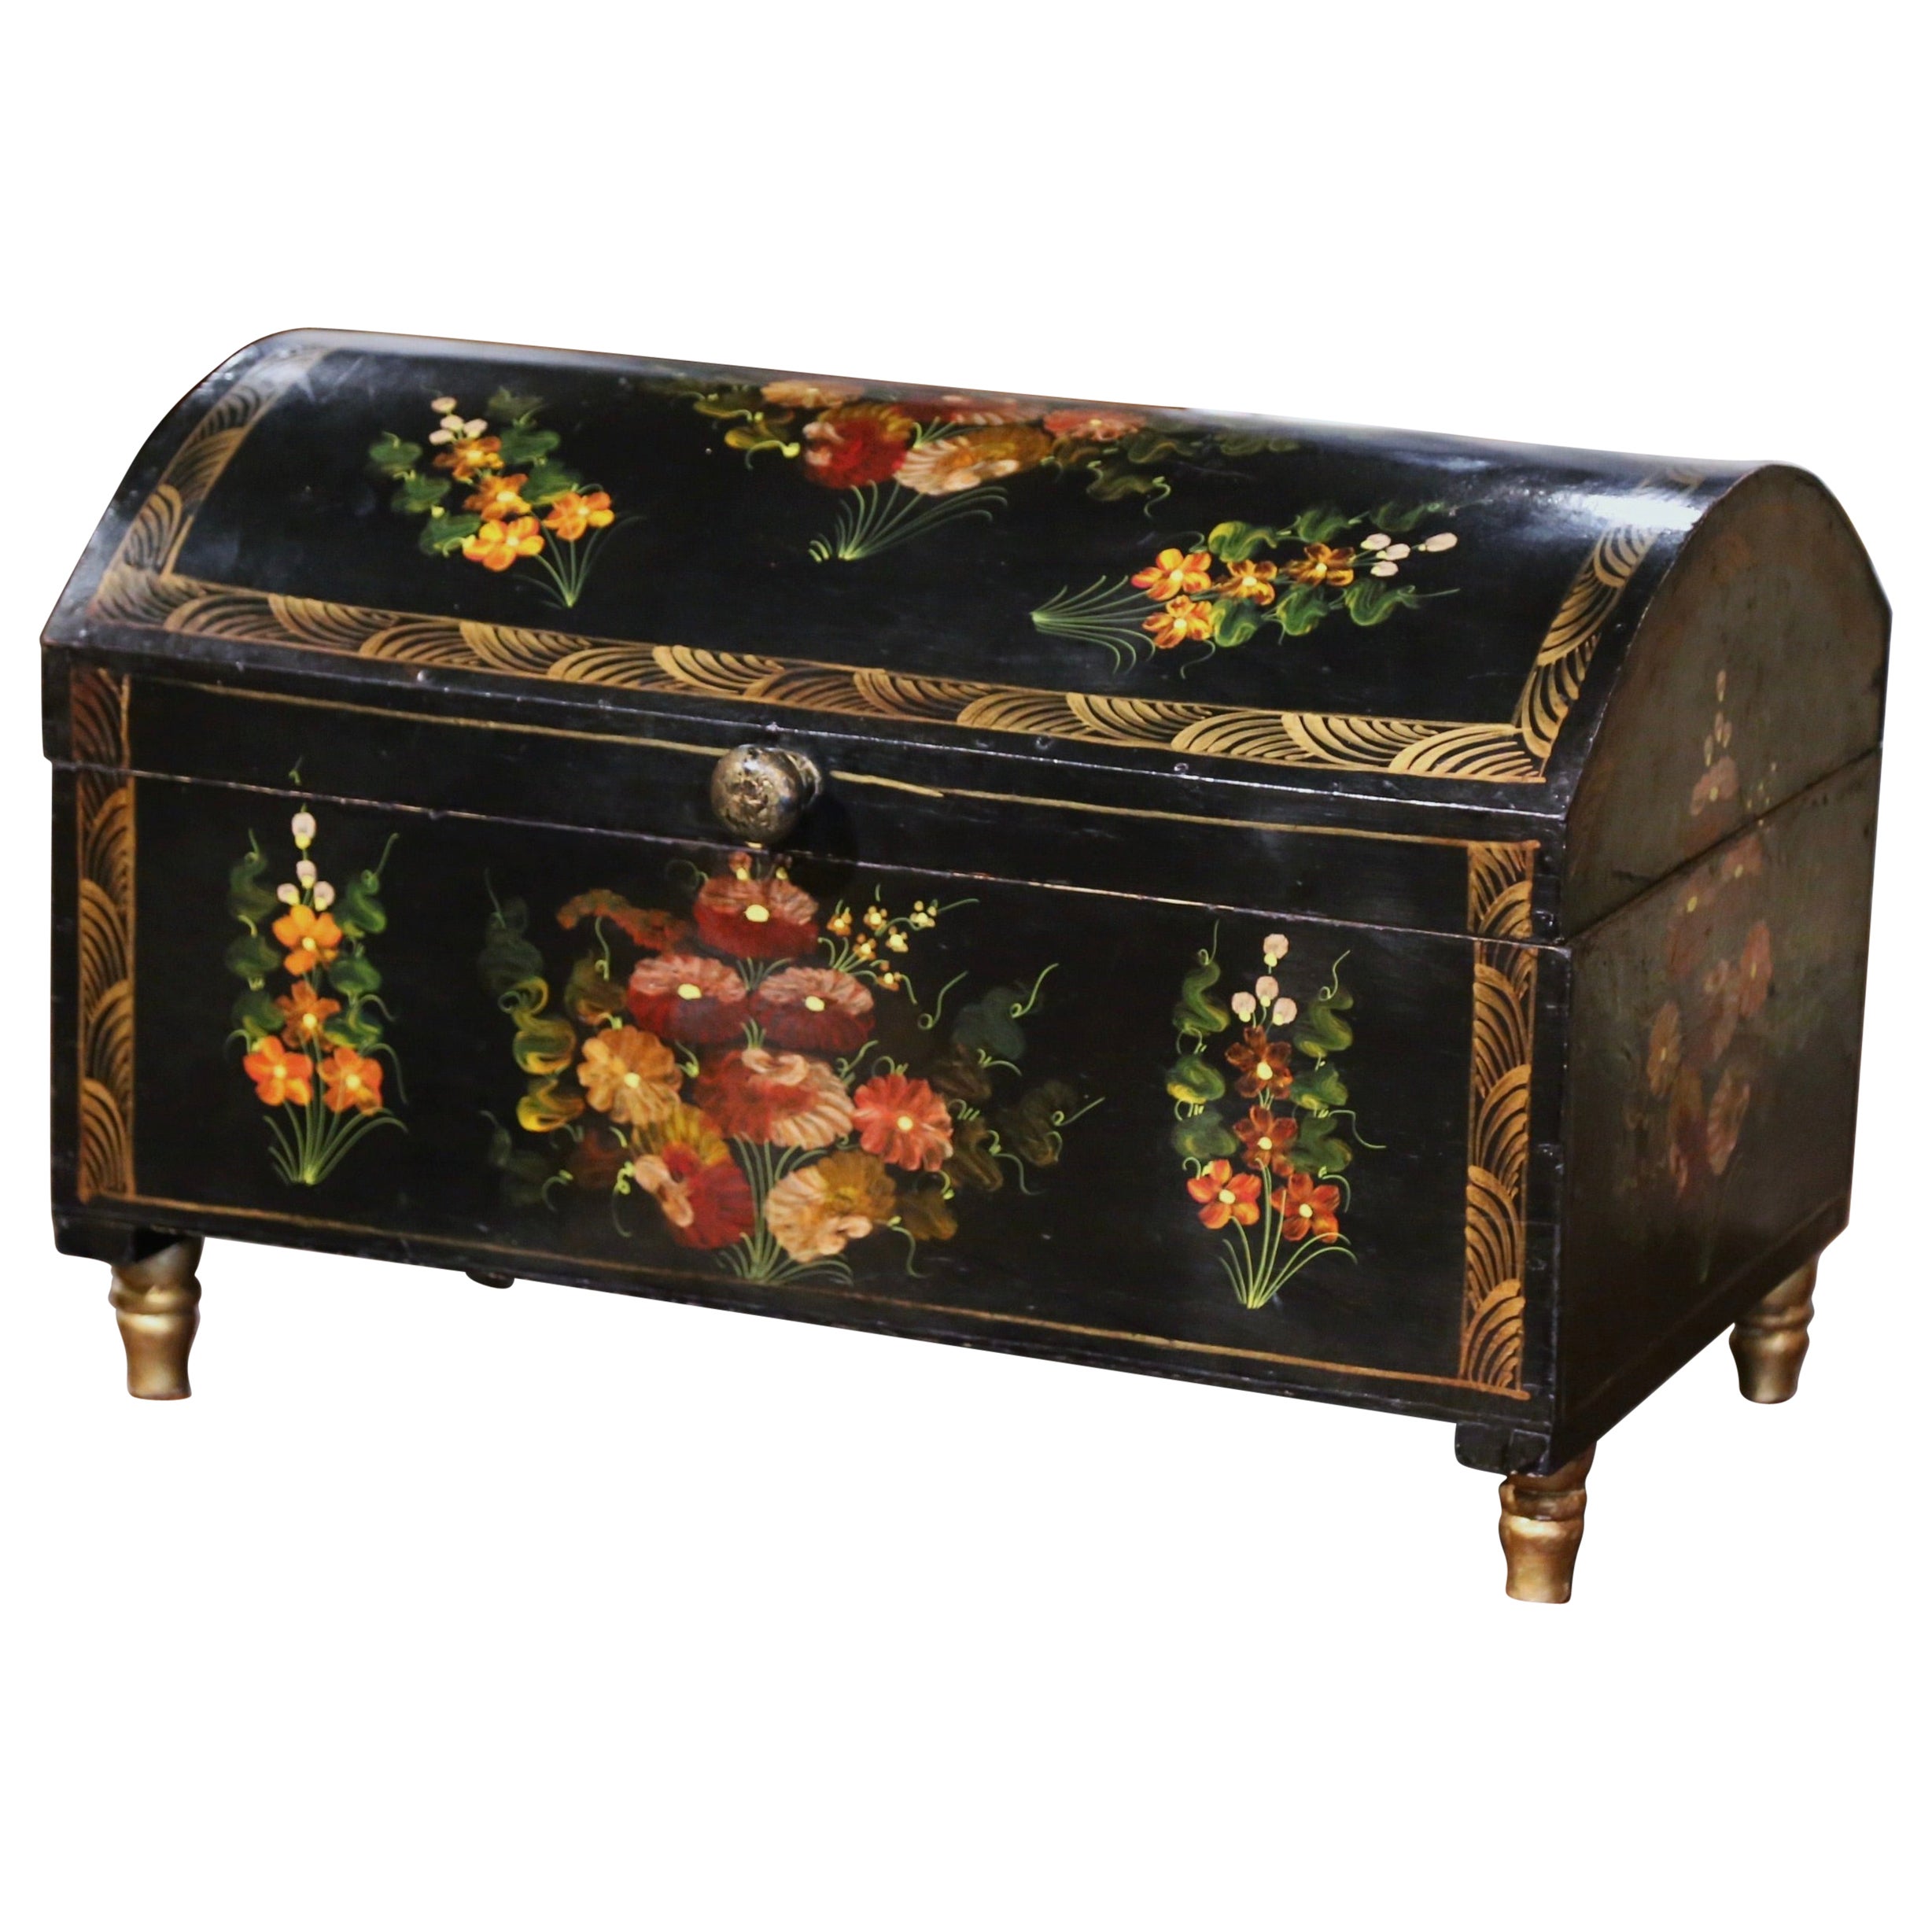 Early 20th Century Spanish Hand Painted Domed Wedding Box with Floral Motifs For Sale